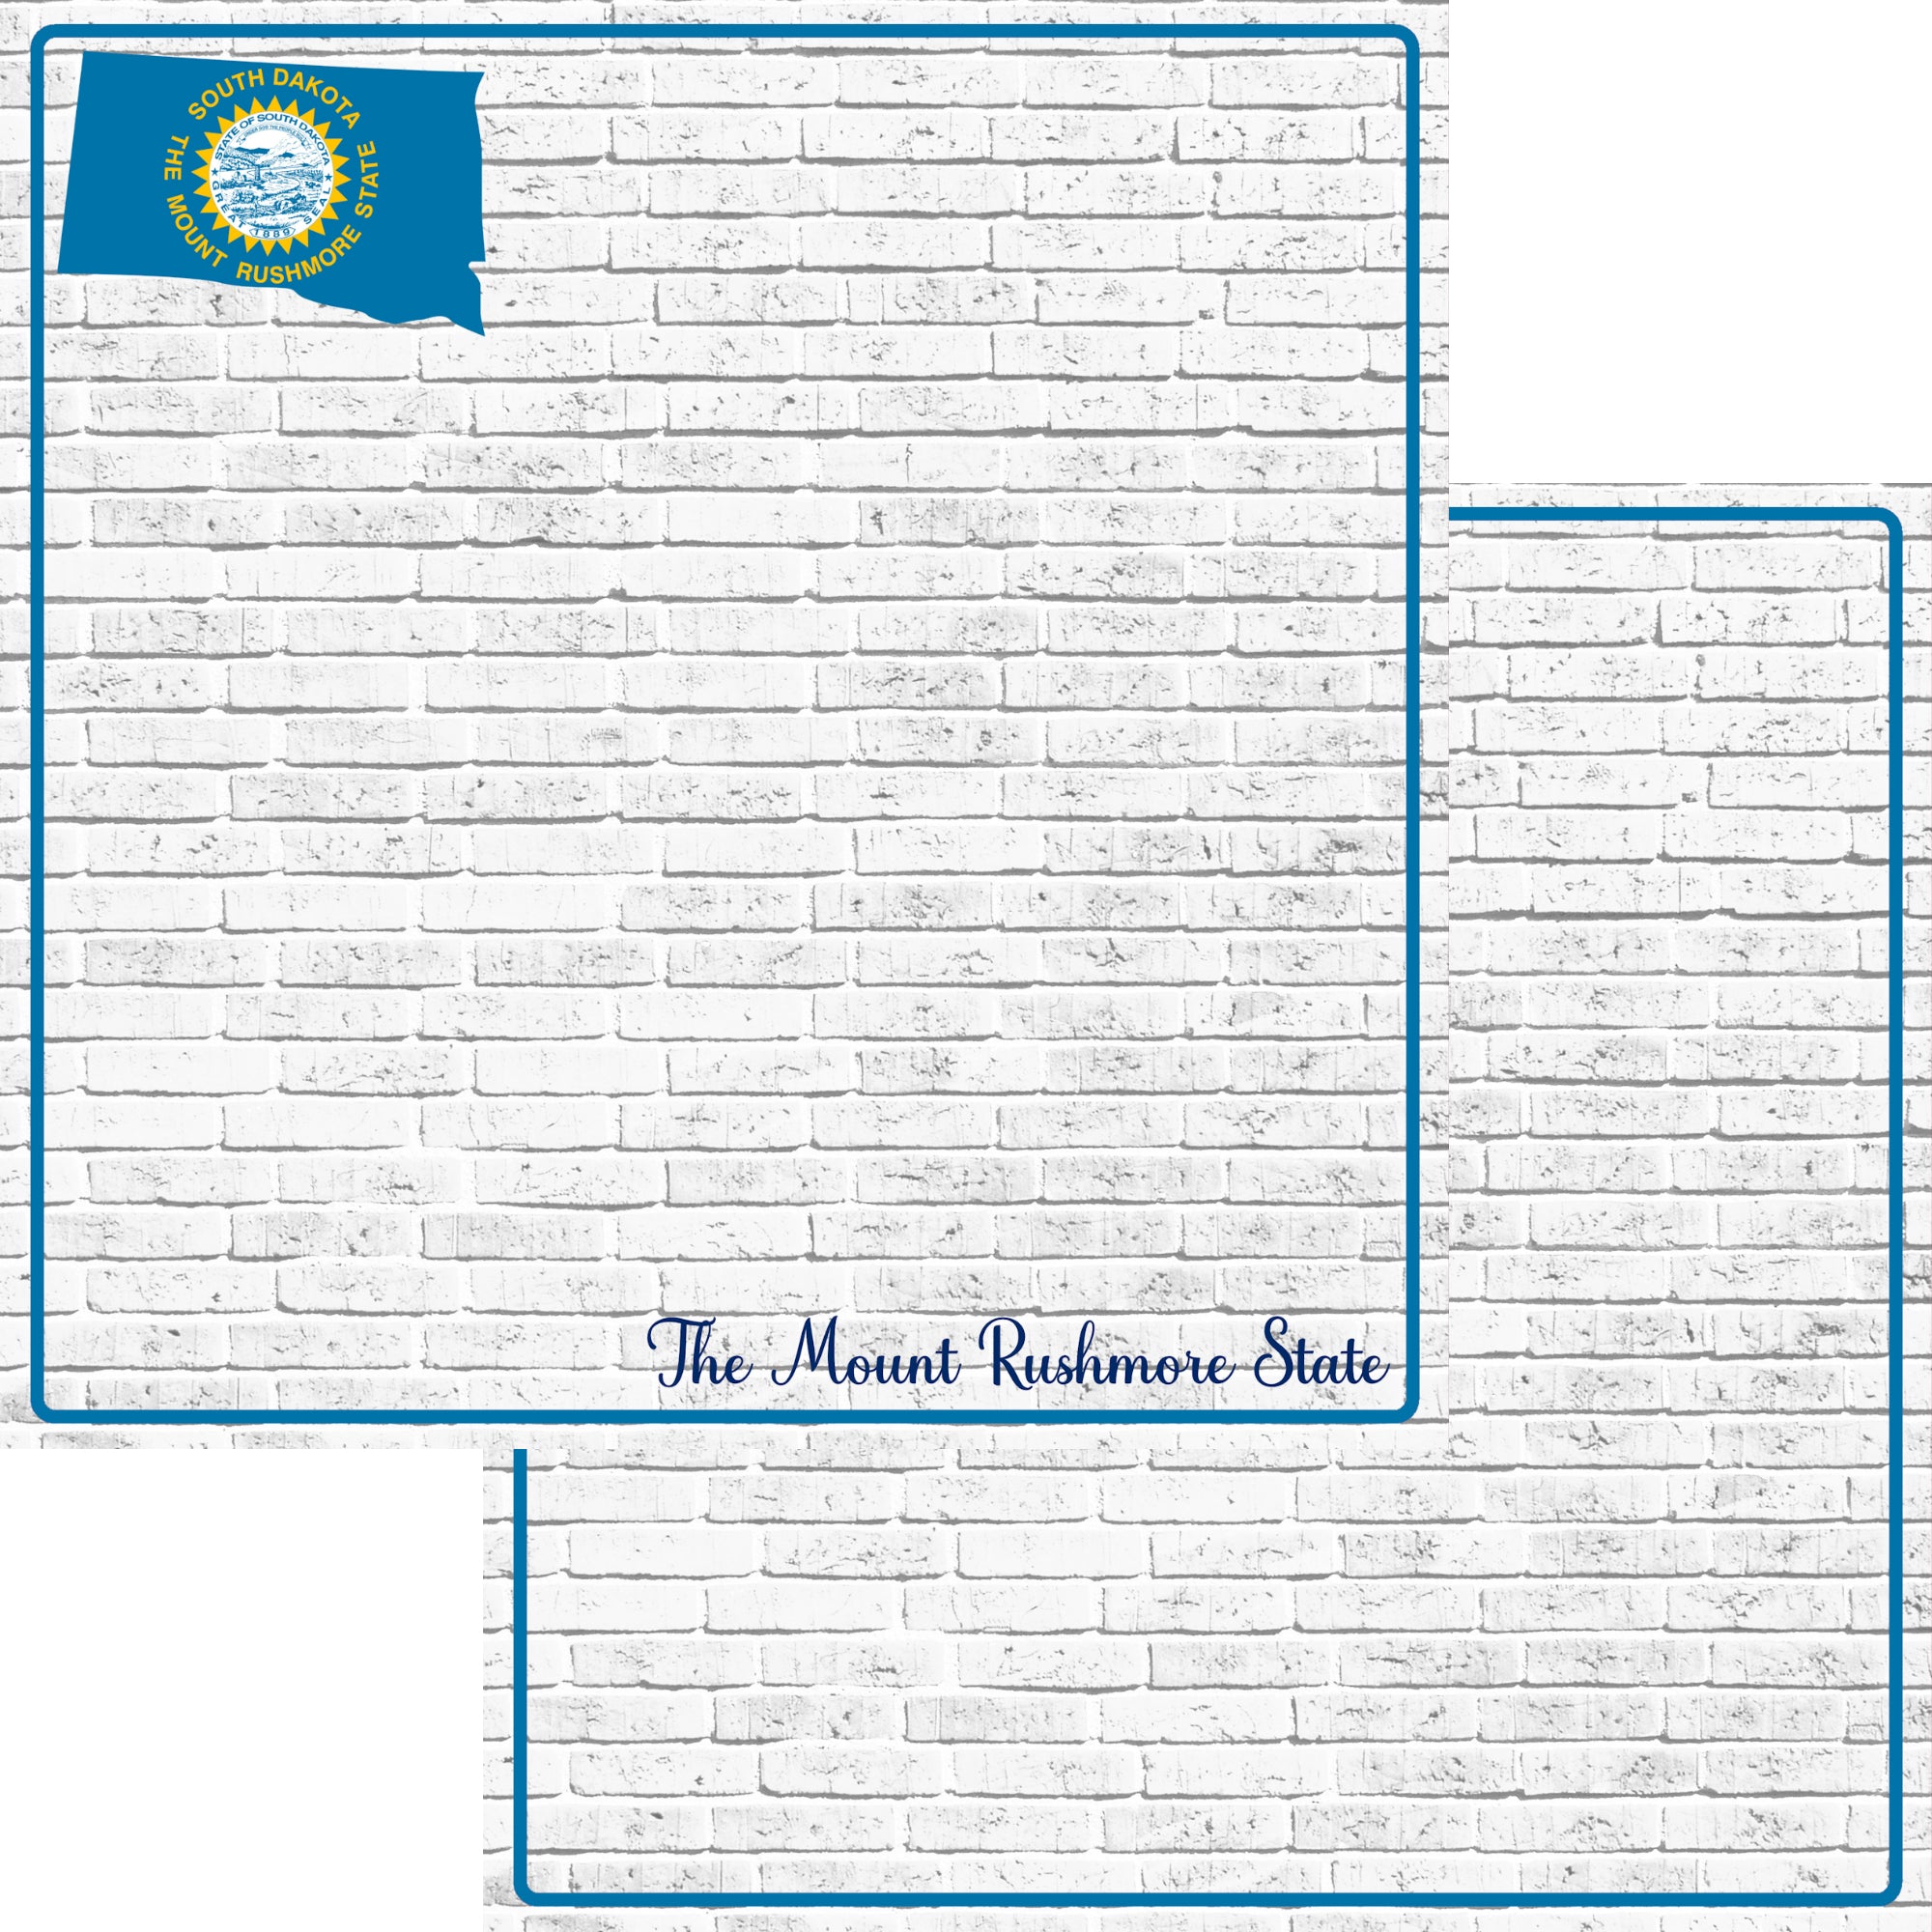 Fifty States Collection South Dakota 12 x 12 Double-Sided Scrapbook Paper by SSC Designs